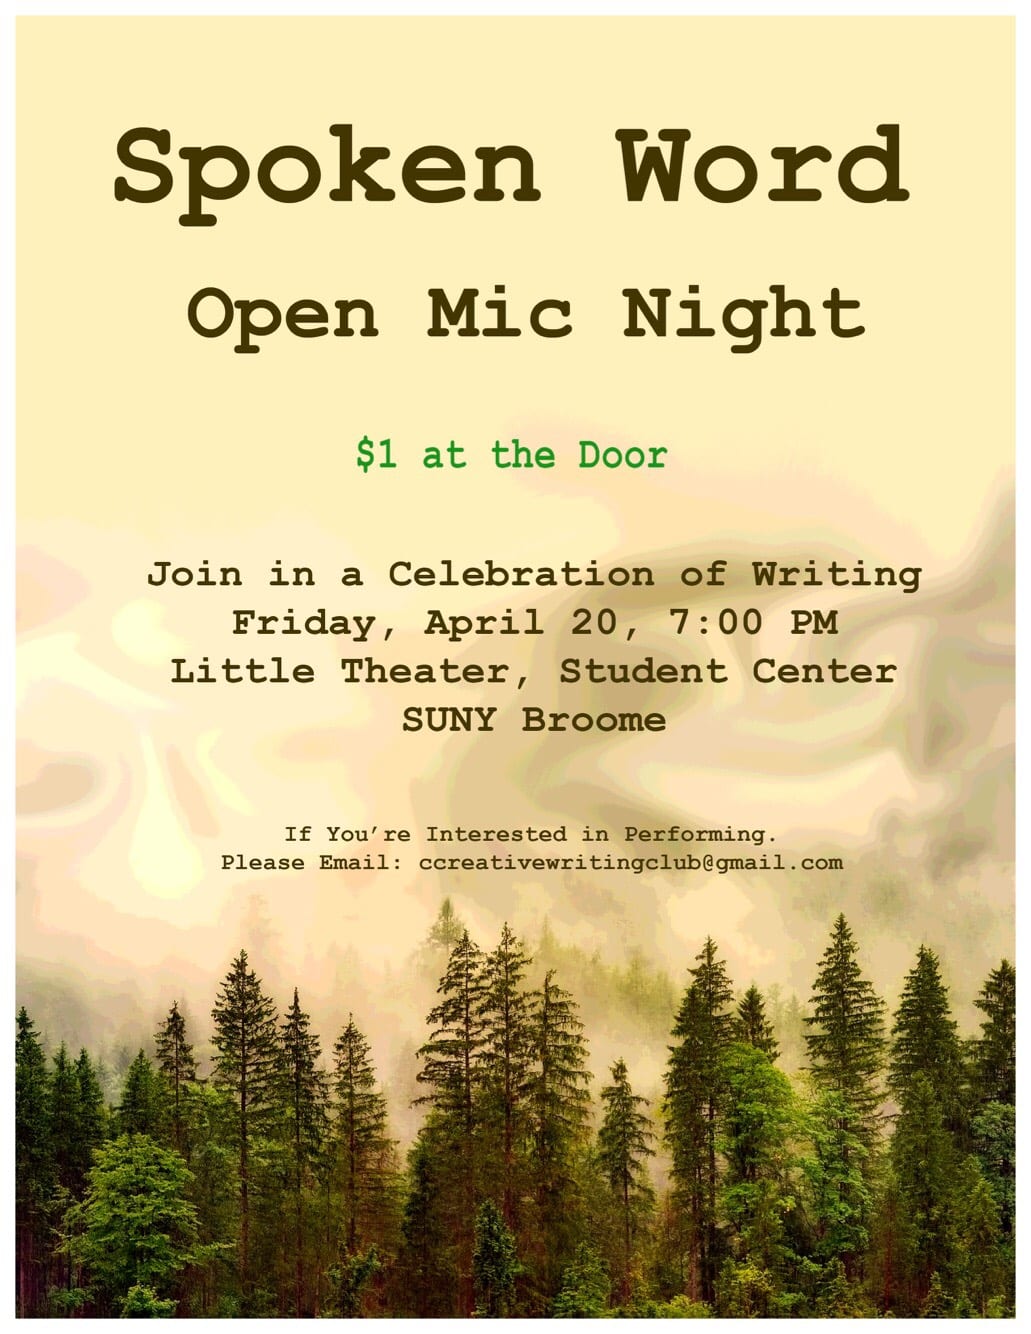 Share your talent: Spoken Word Open Mic Night on April 20